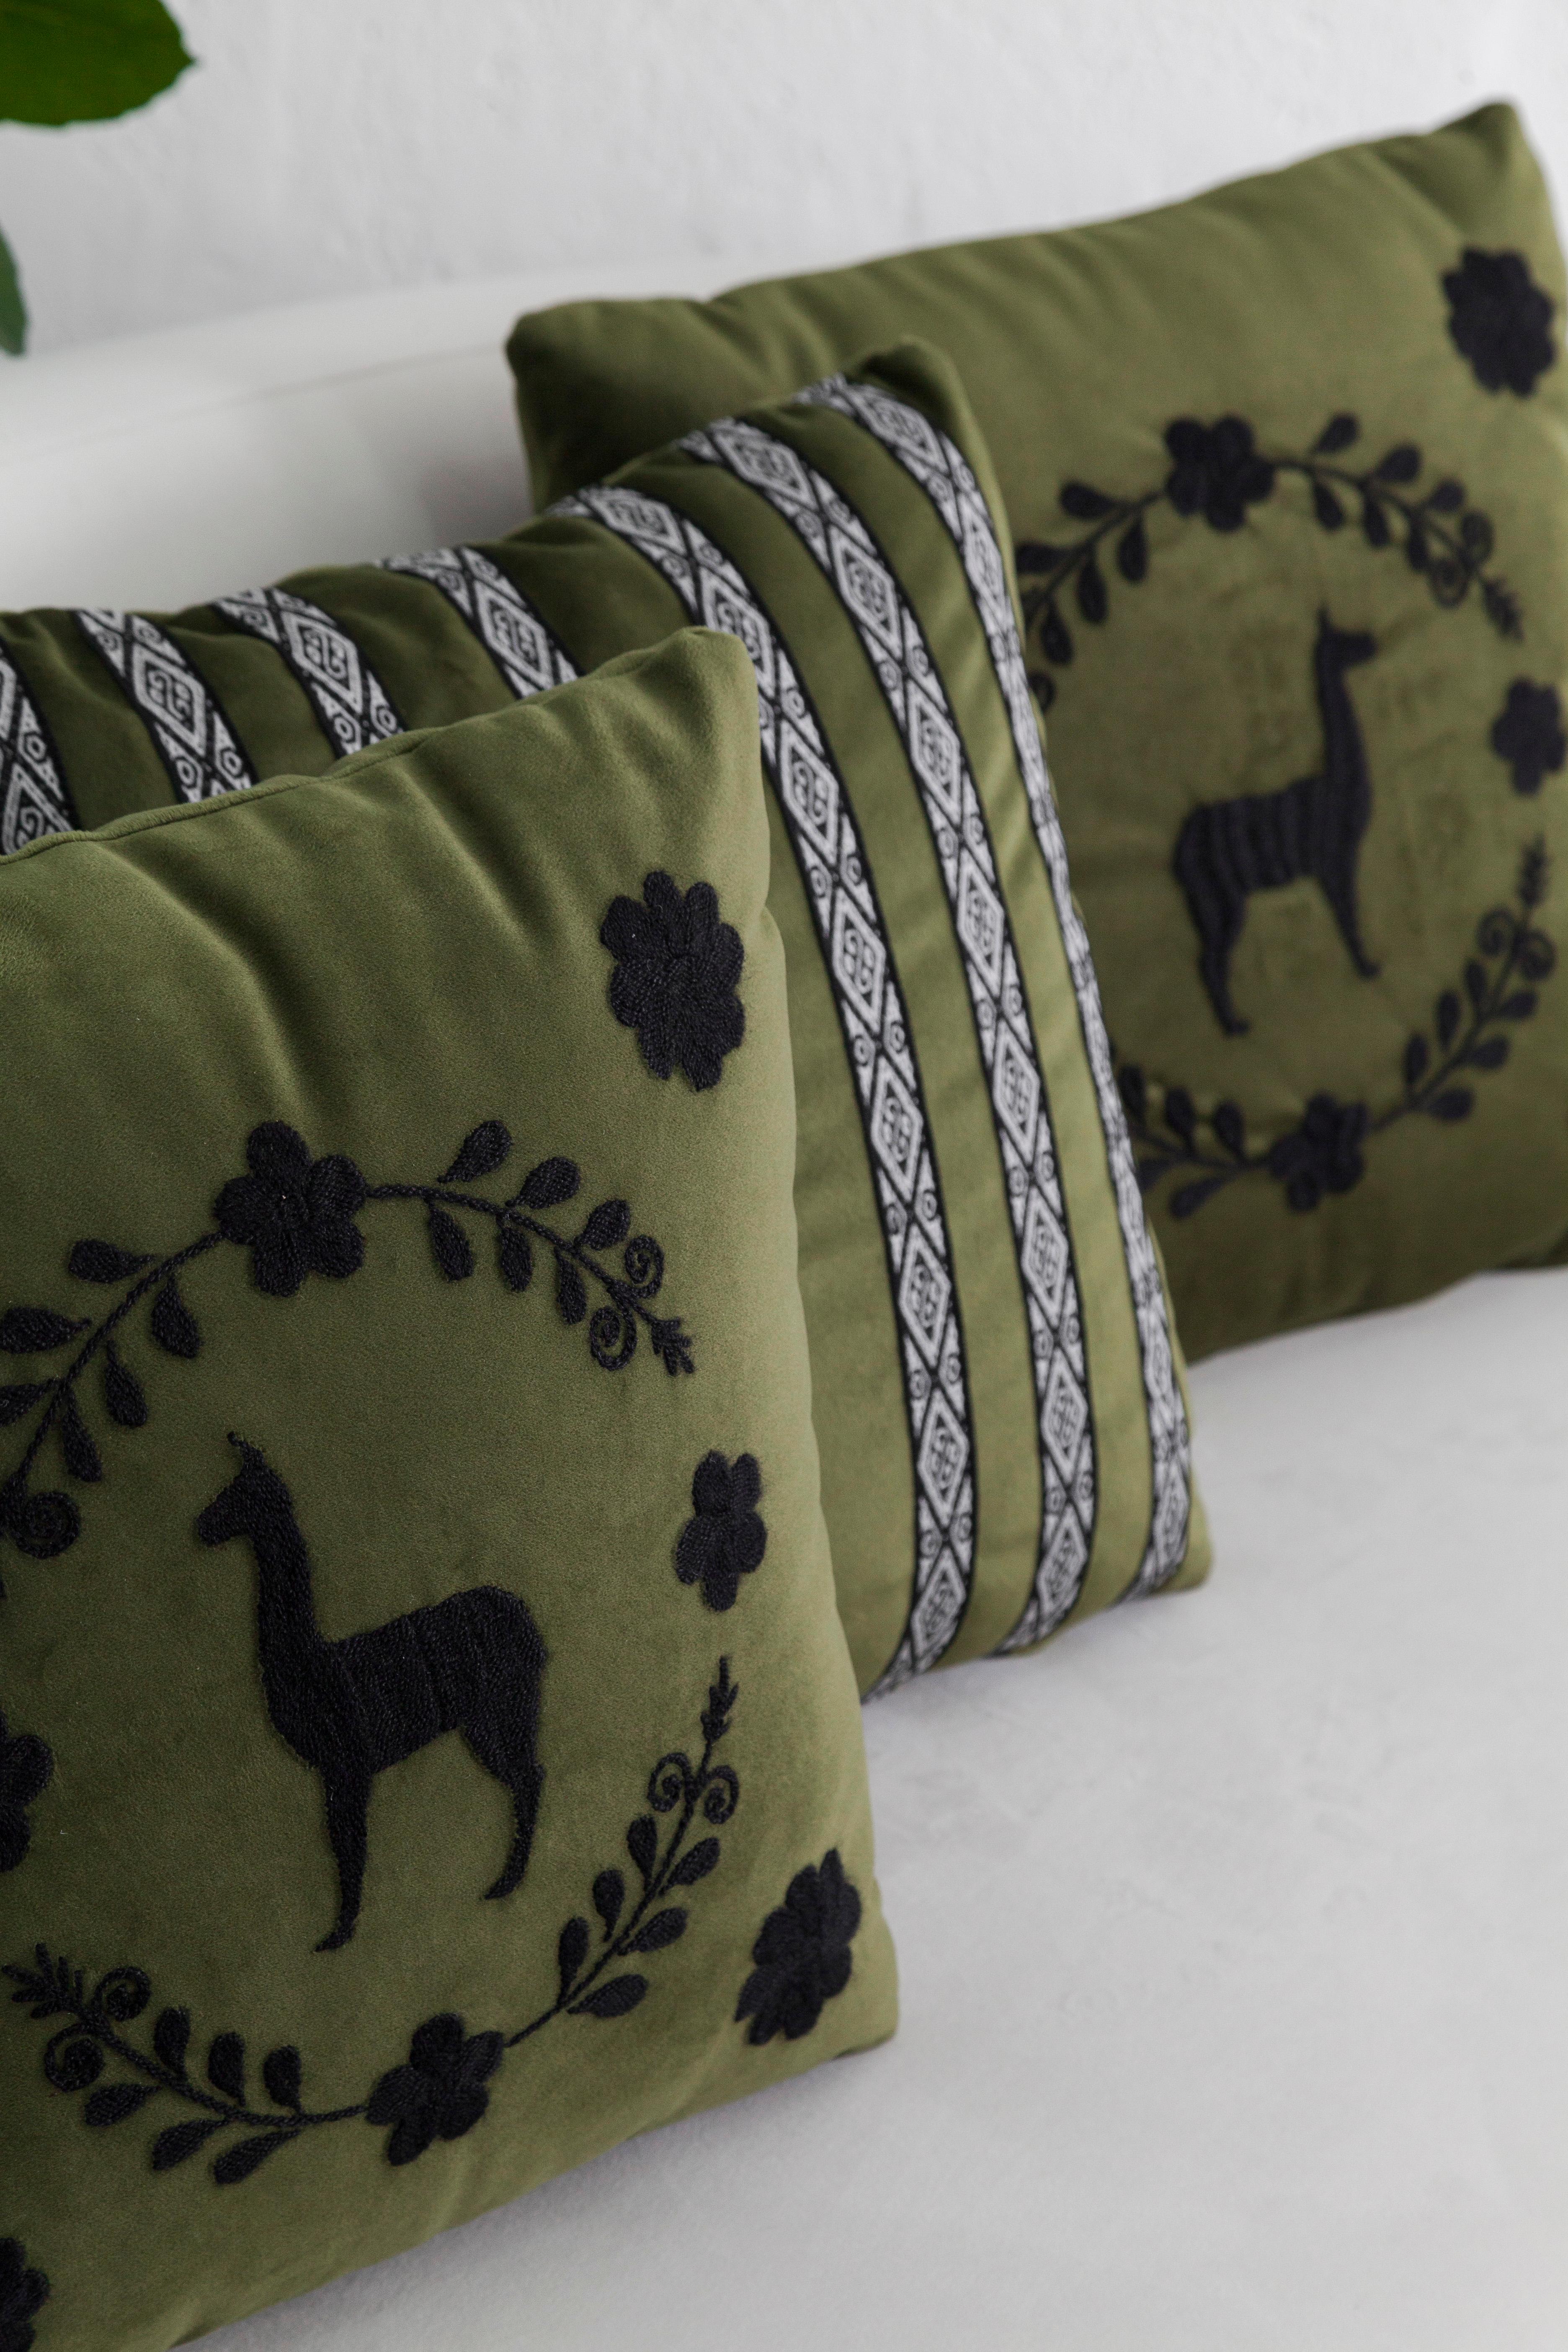 LLAMA Hand Embroidered Decorative Pillows in Olive Velvet by ANDEAN, Set of 2 For Sale 1